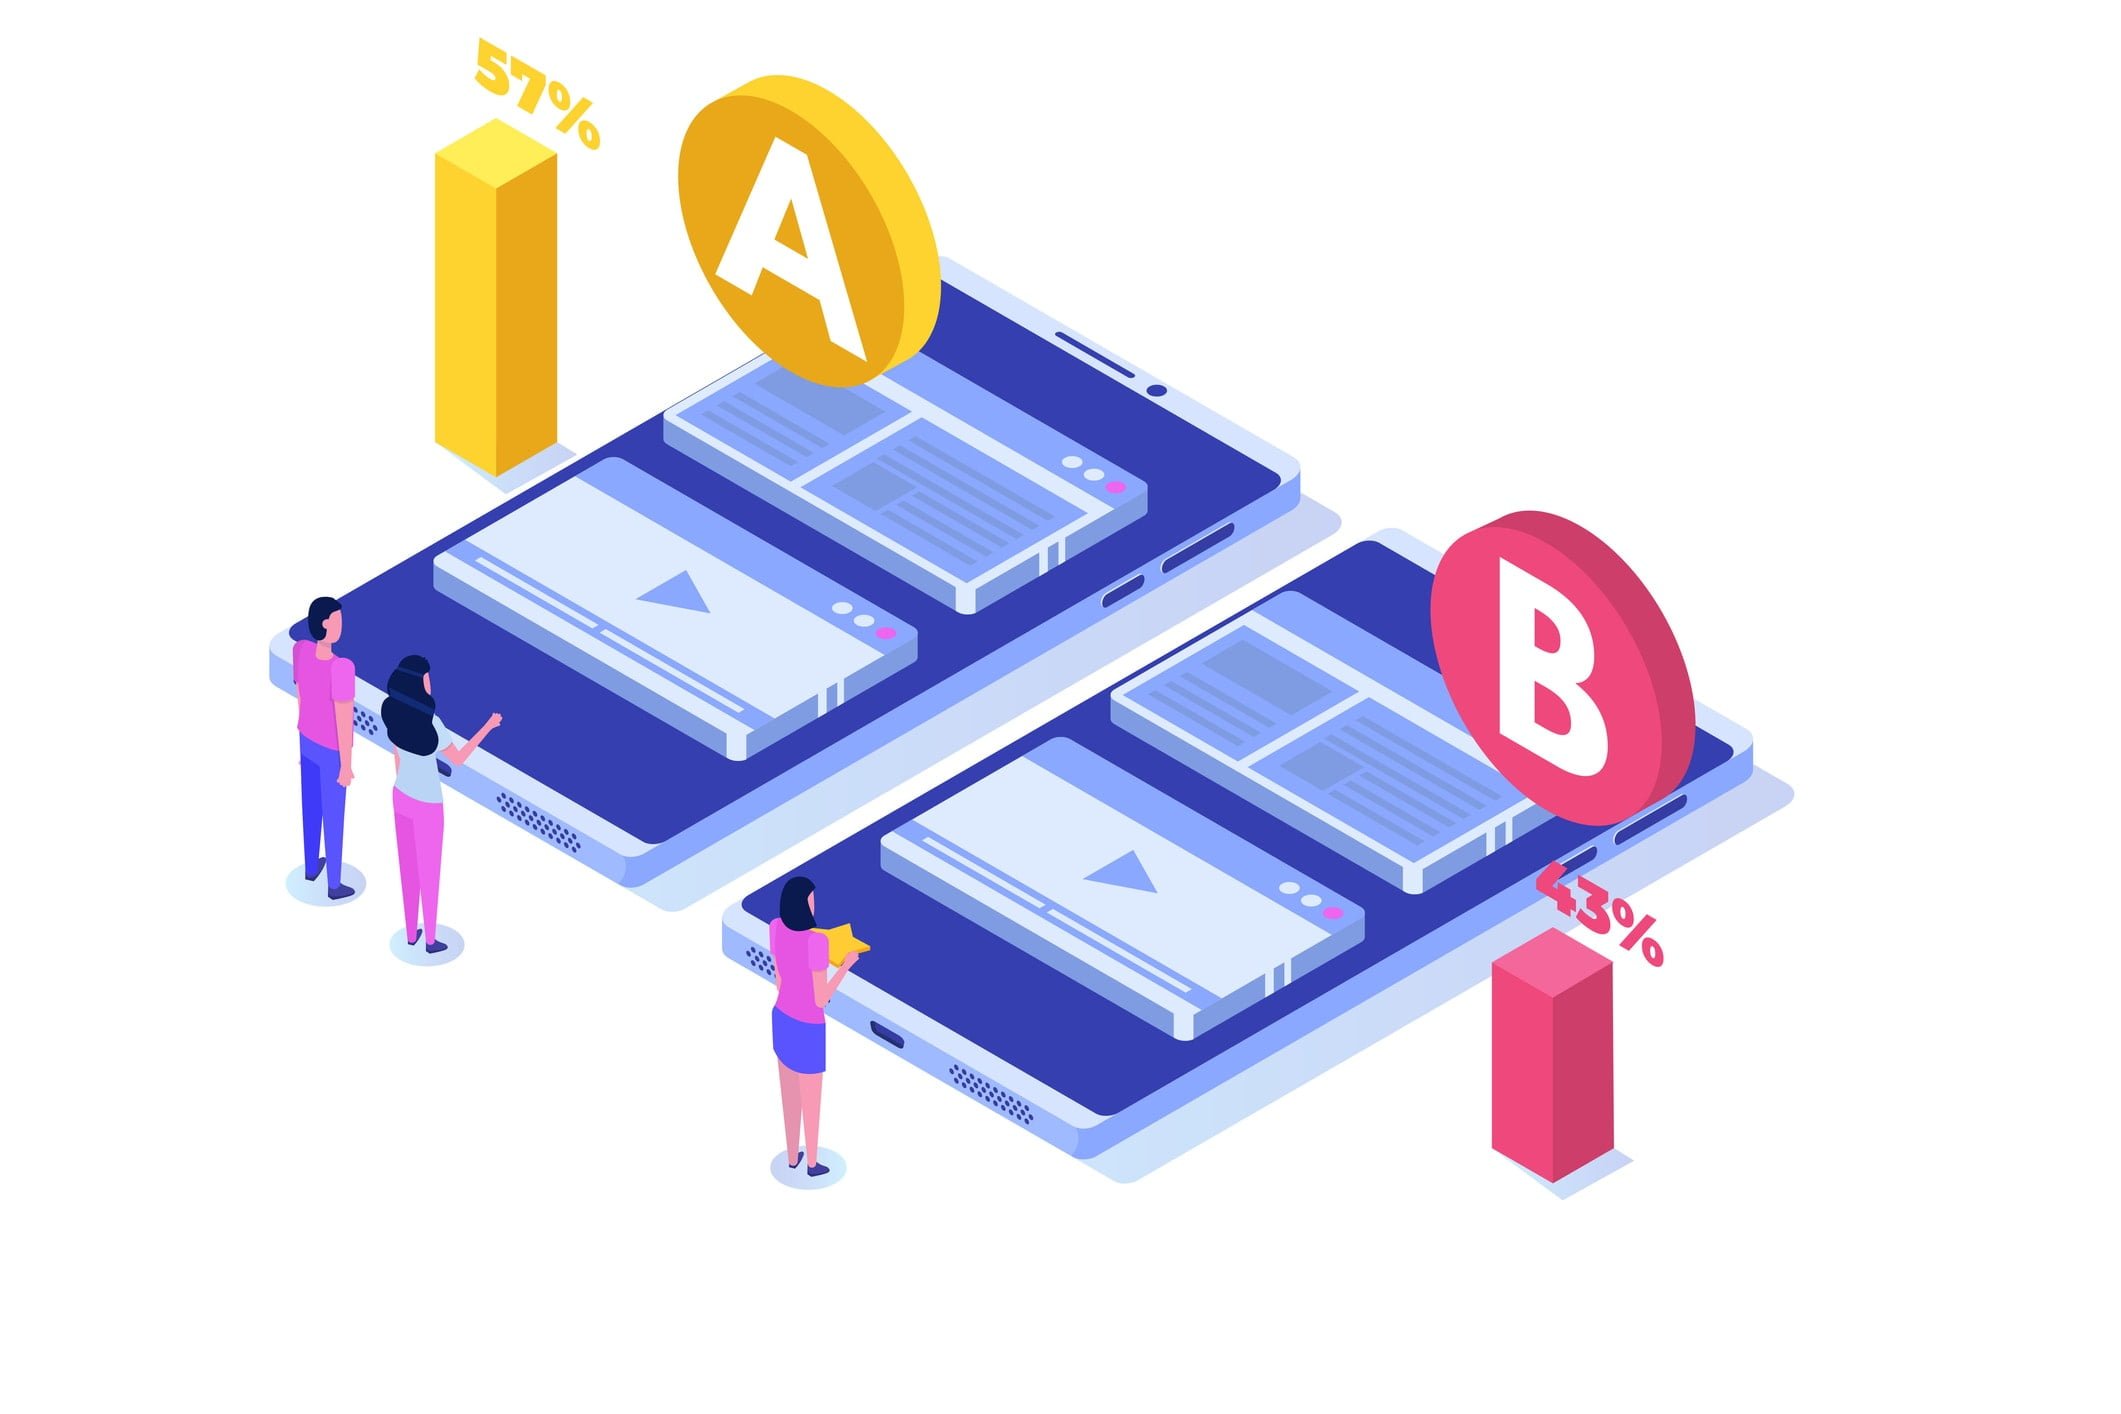 A/B Testing: what is it and when to use it